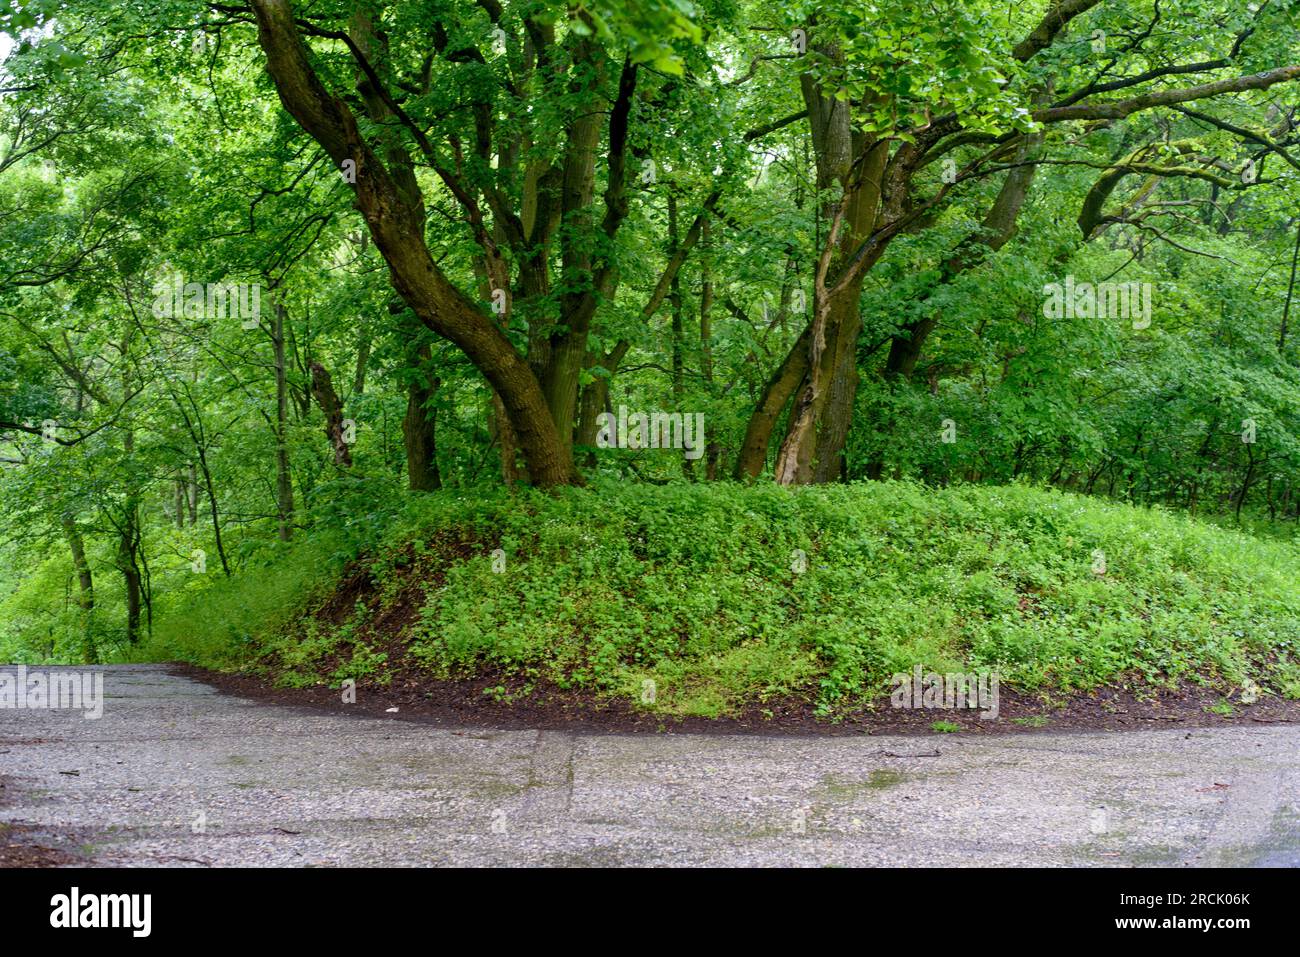 Forest. Landscape. Springtime in forest after raining. With Sustainable and Renewable Energy, Nature is Always Clean, Springtime in forest after raini Stock Photo